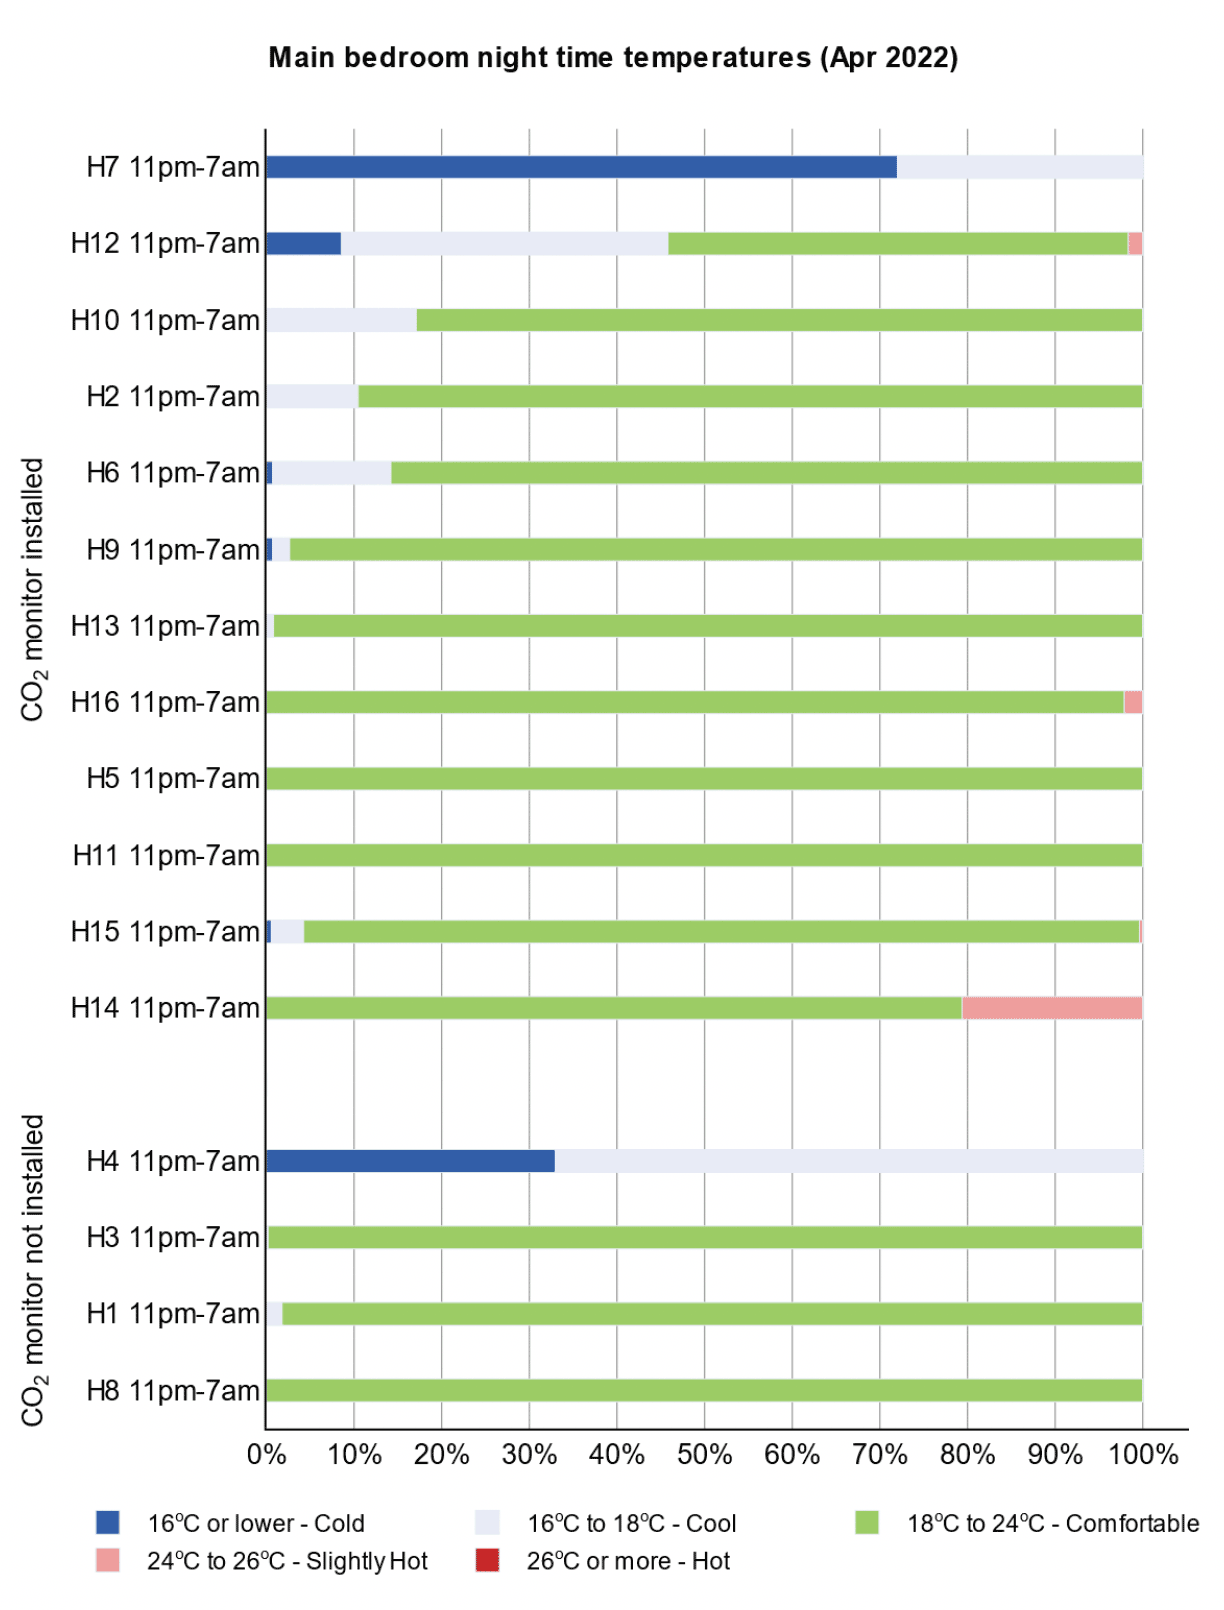 Bar chart indicating night time Spring temperatures in main bedrooms.